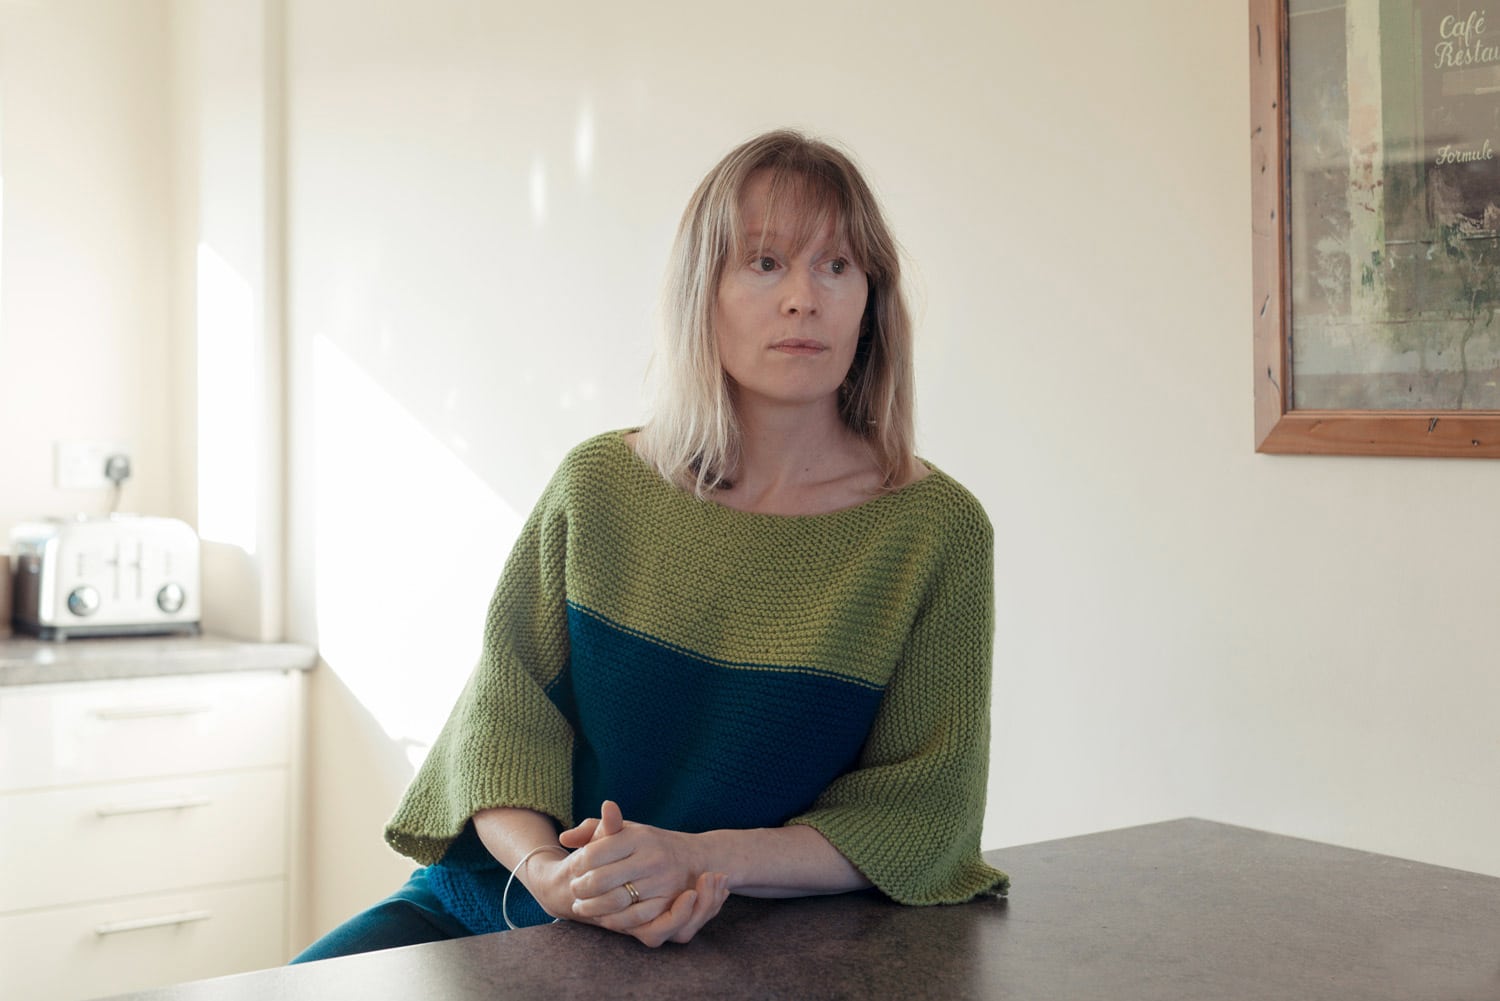 Kate Harding who wrote about her husband's recent suicide, photographed in Hereford for the Guardian Weekend magazine